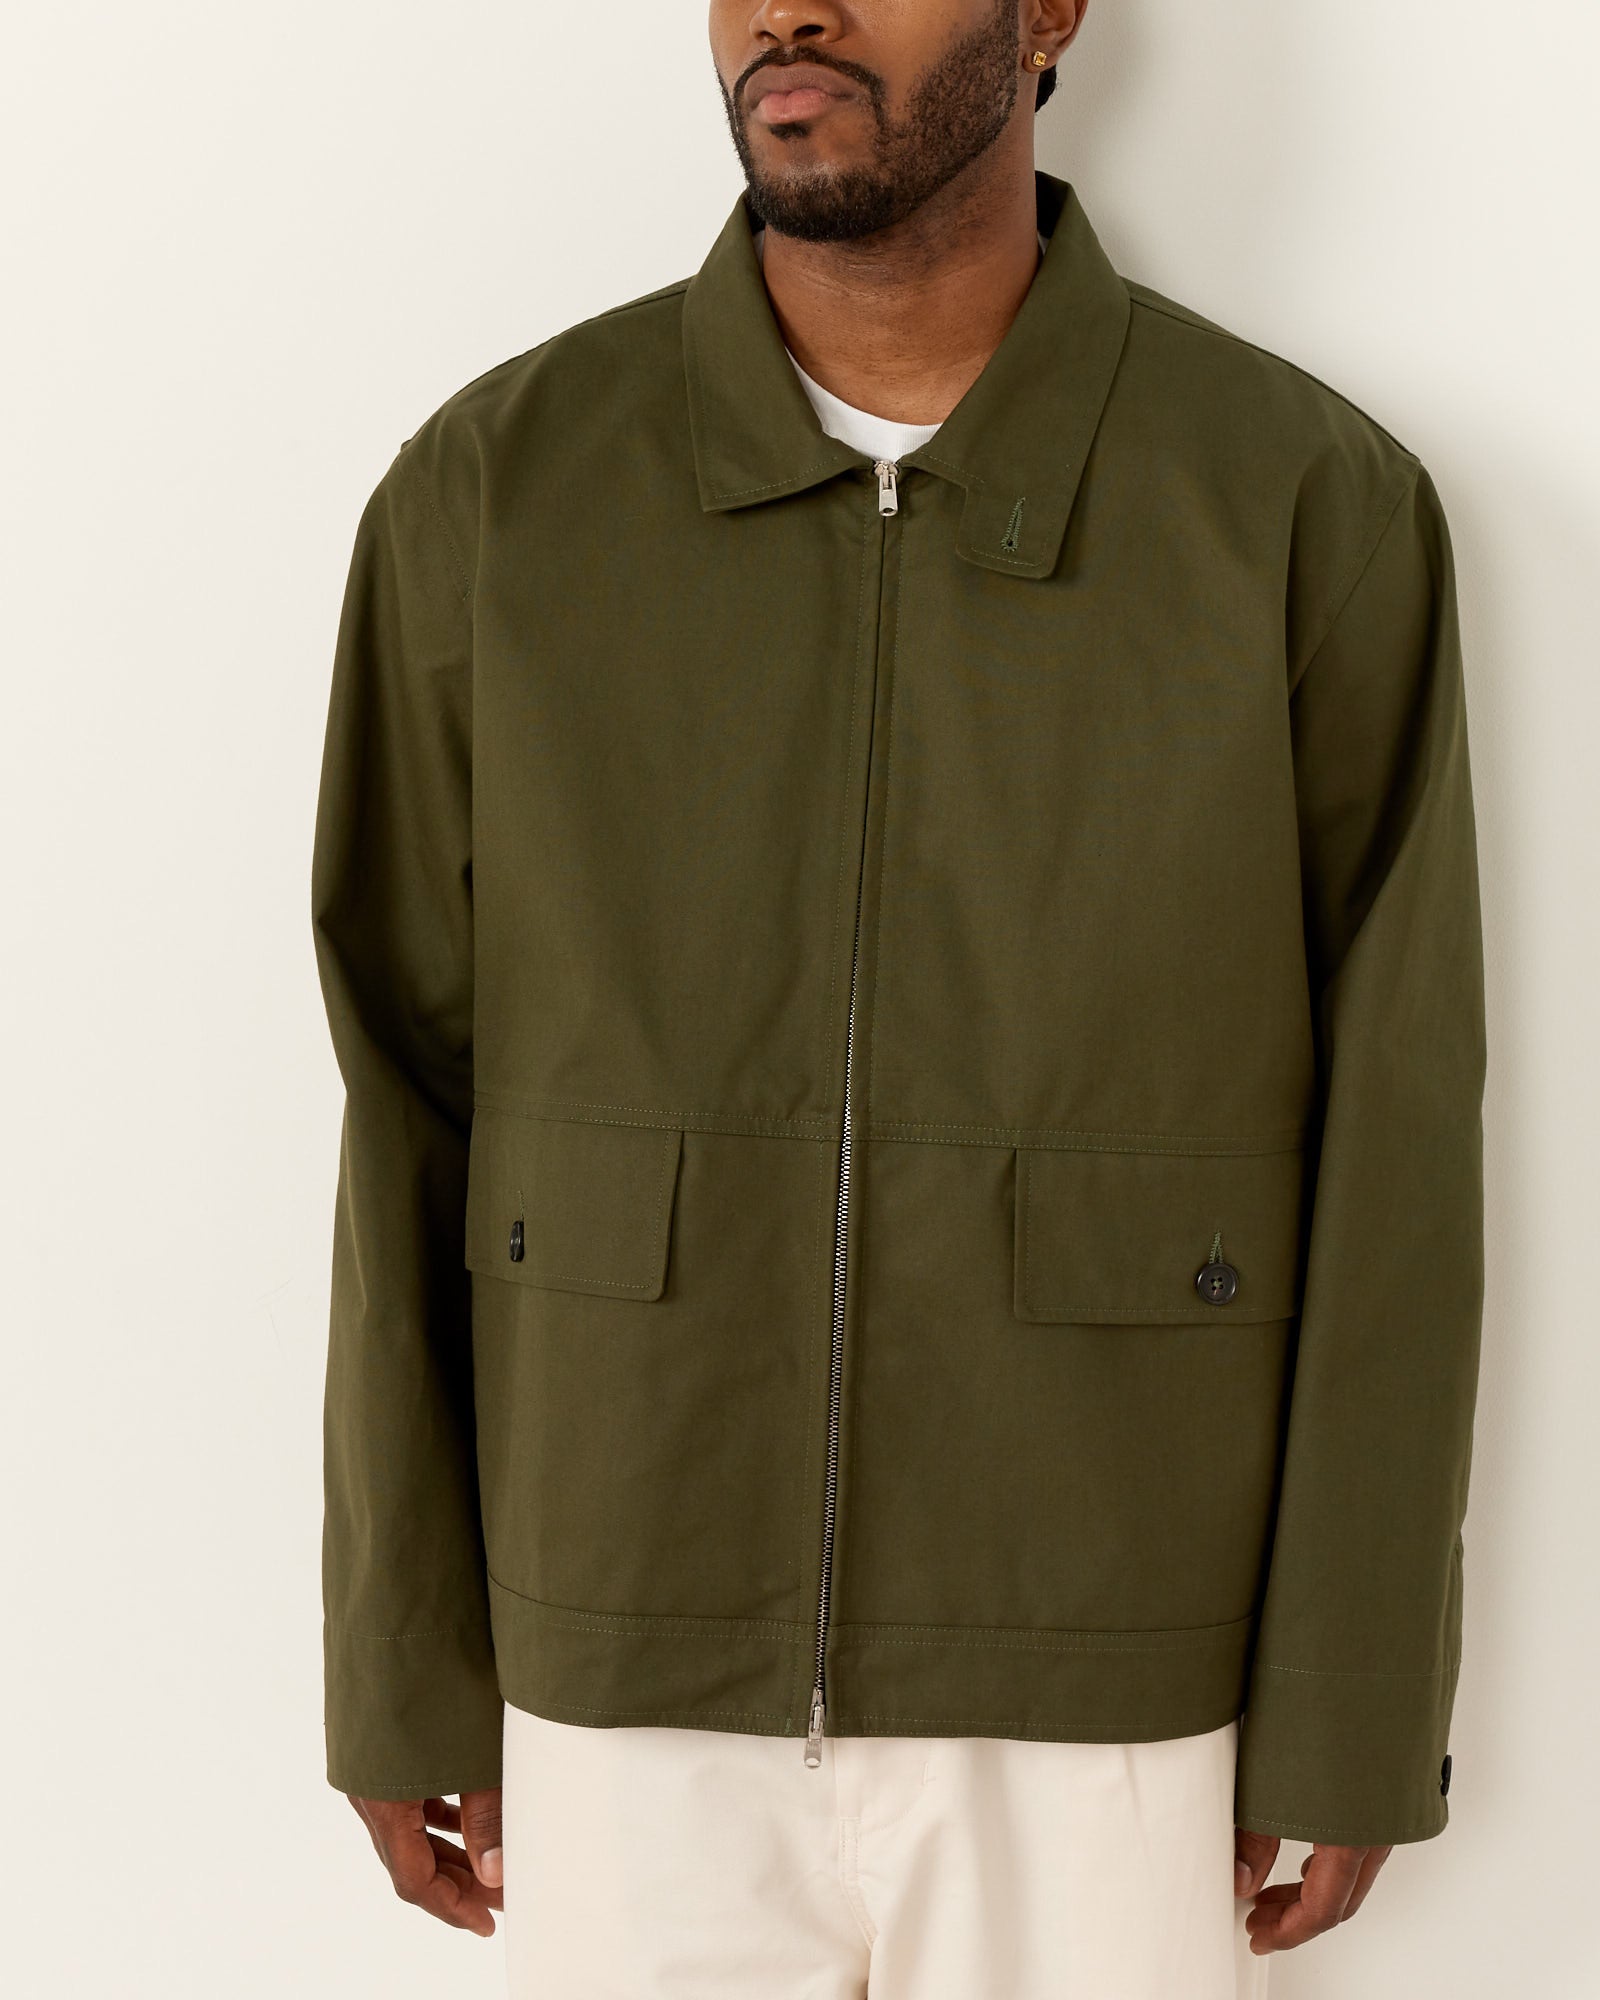 Stand Collar Jacket in Olive